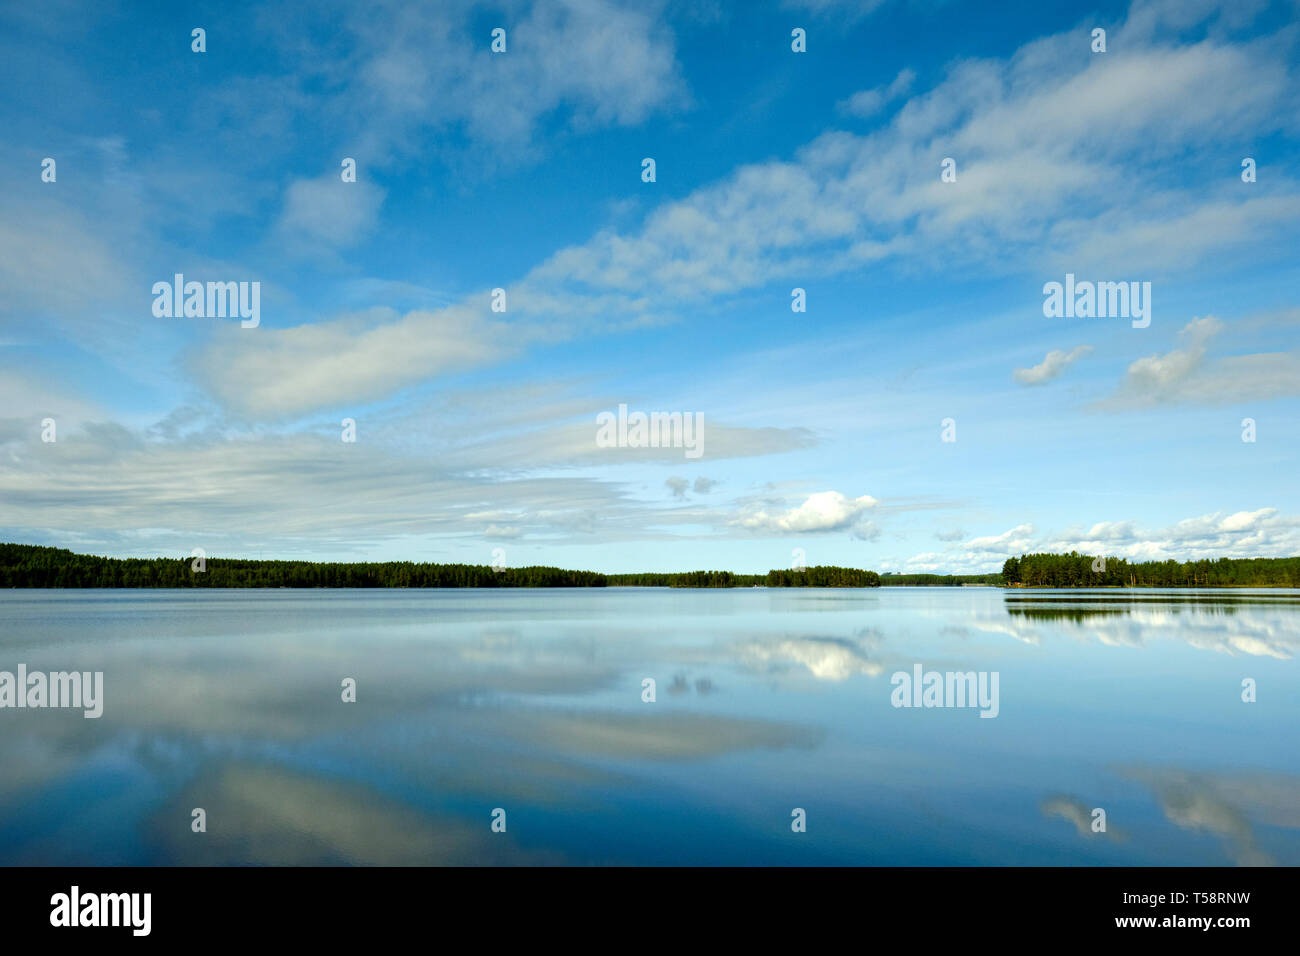 The still water and blue sky summer lake landscape of Sweden. Stock Photo